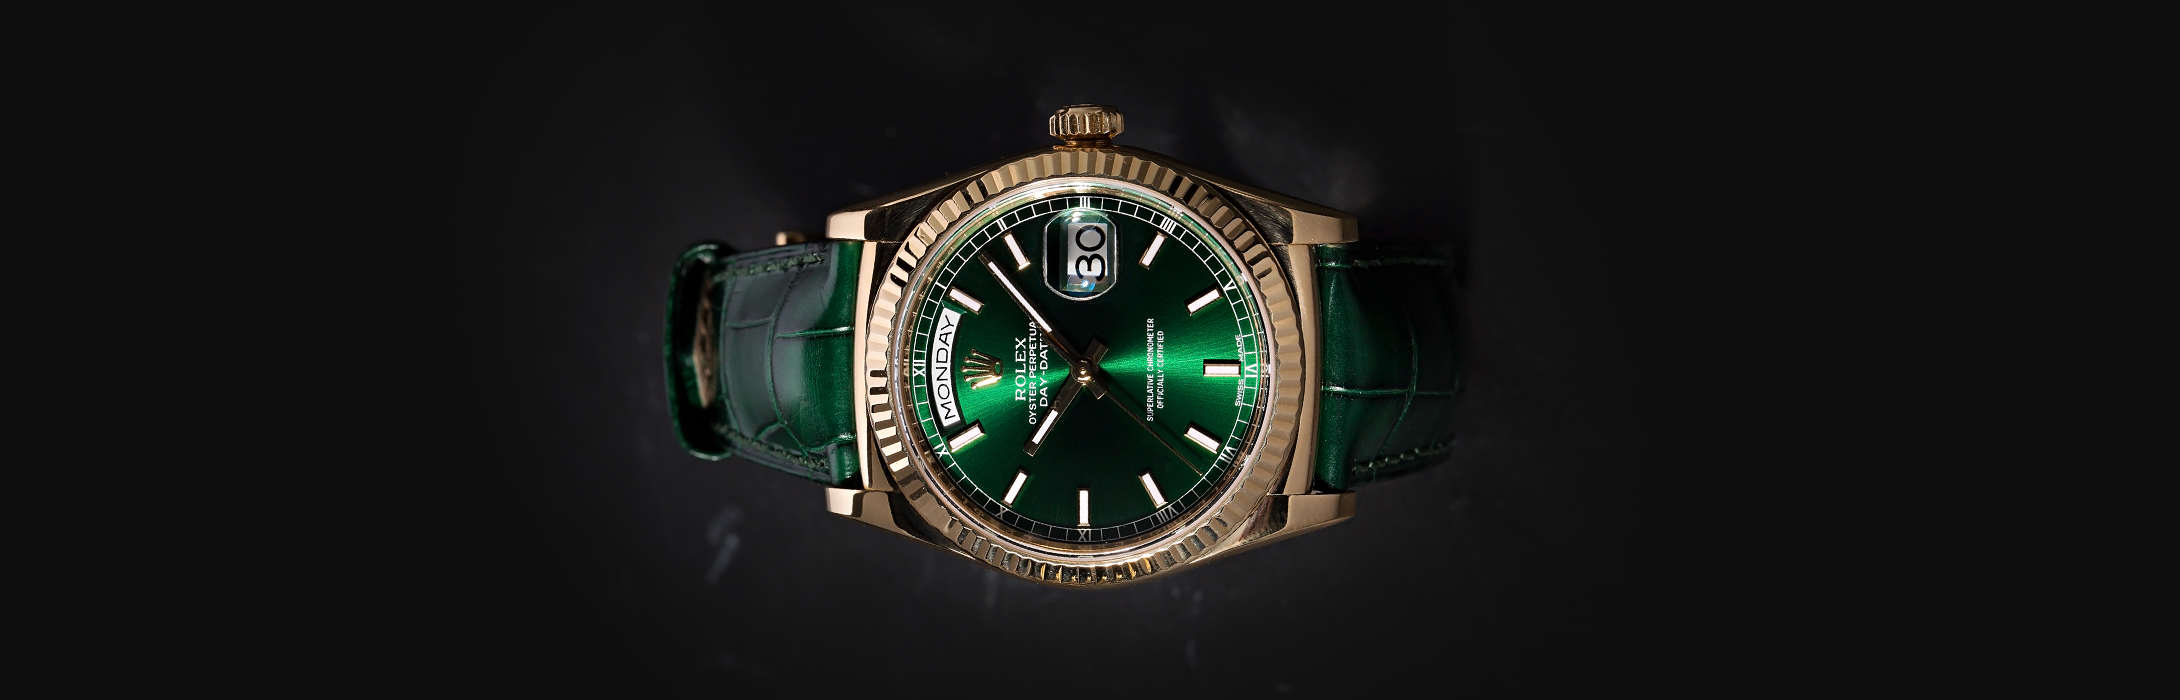 Rolex Green Face Watches Ultimate Guide - Bob's Watches